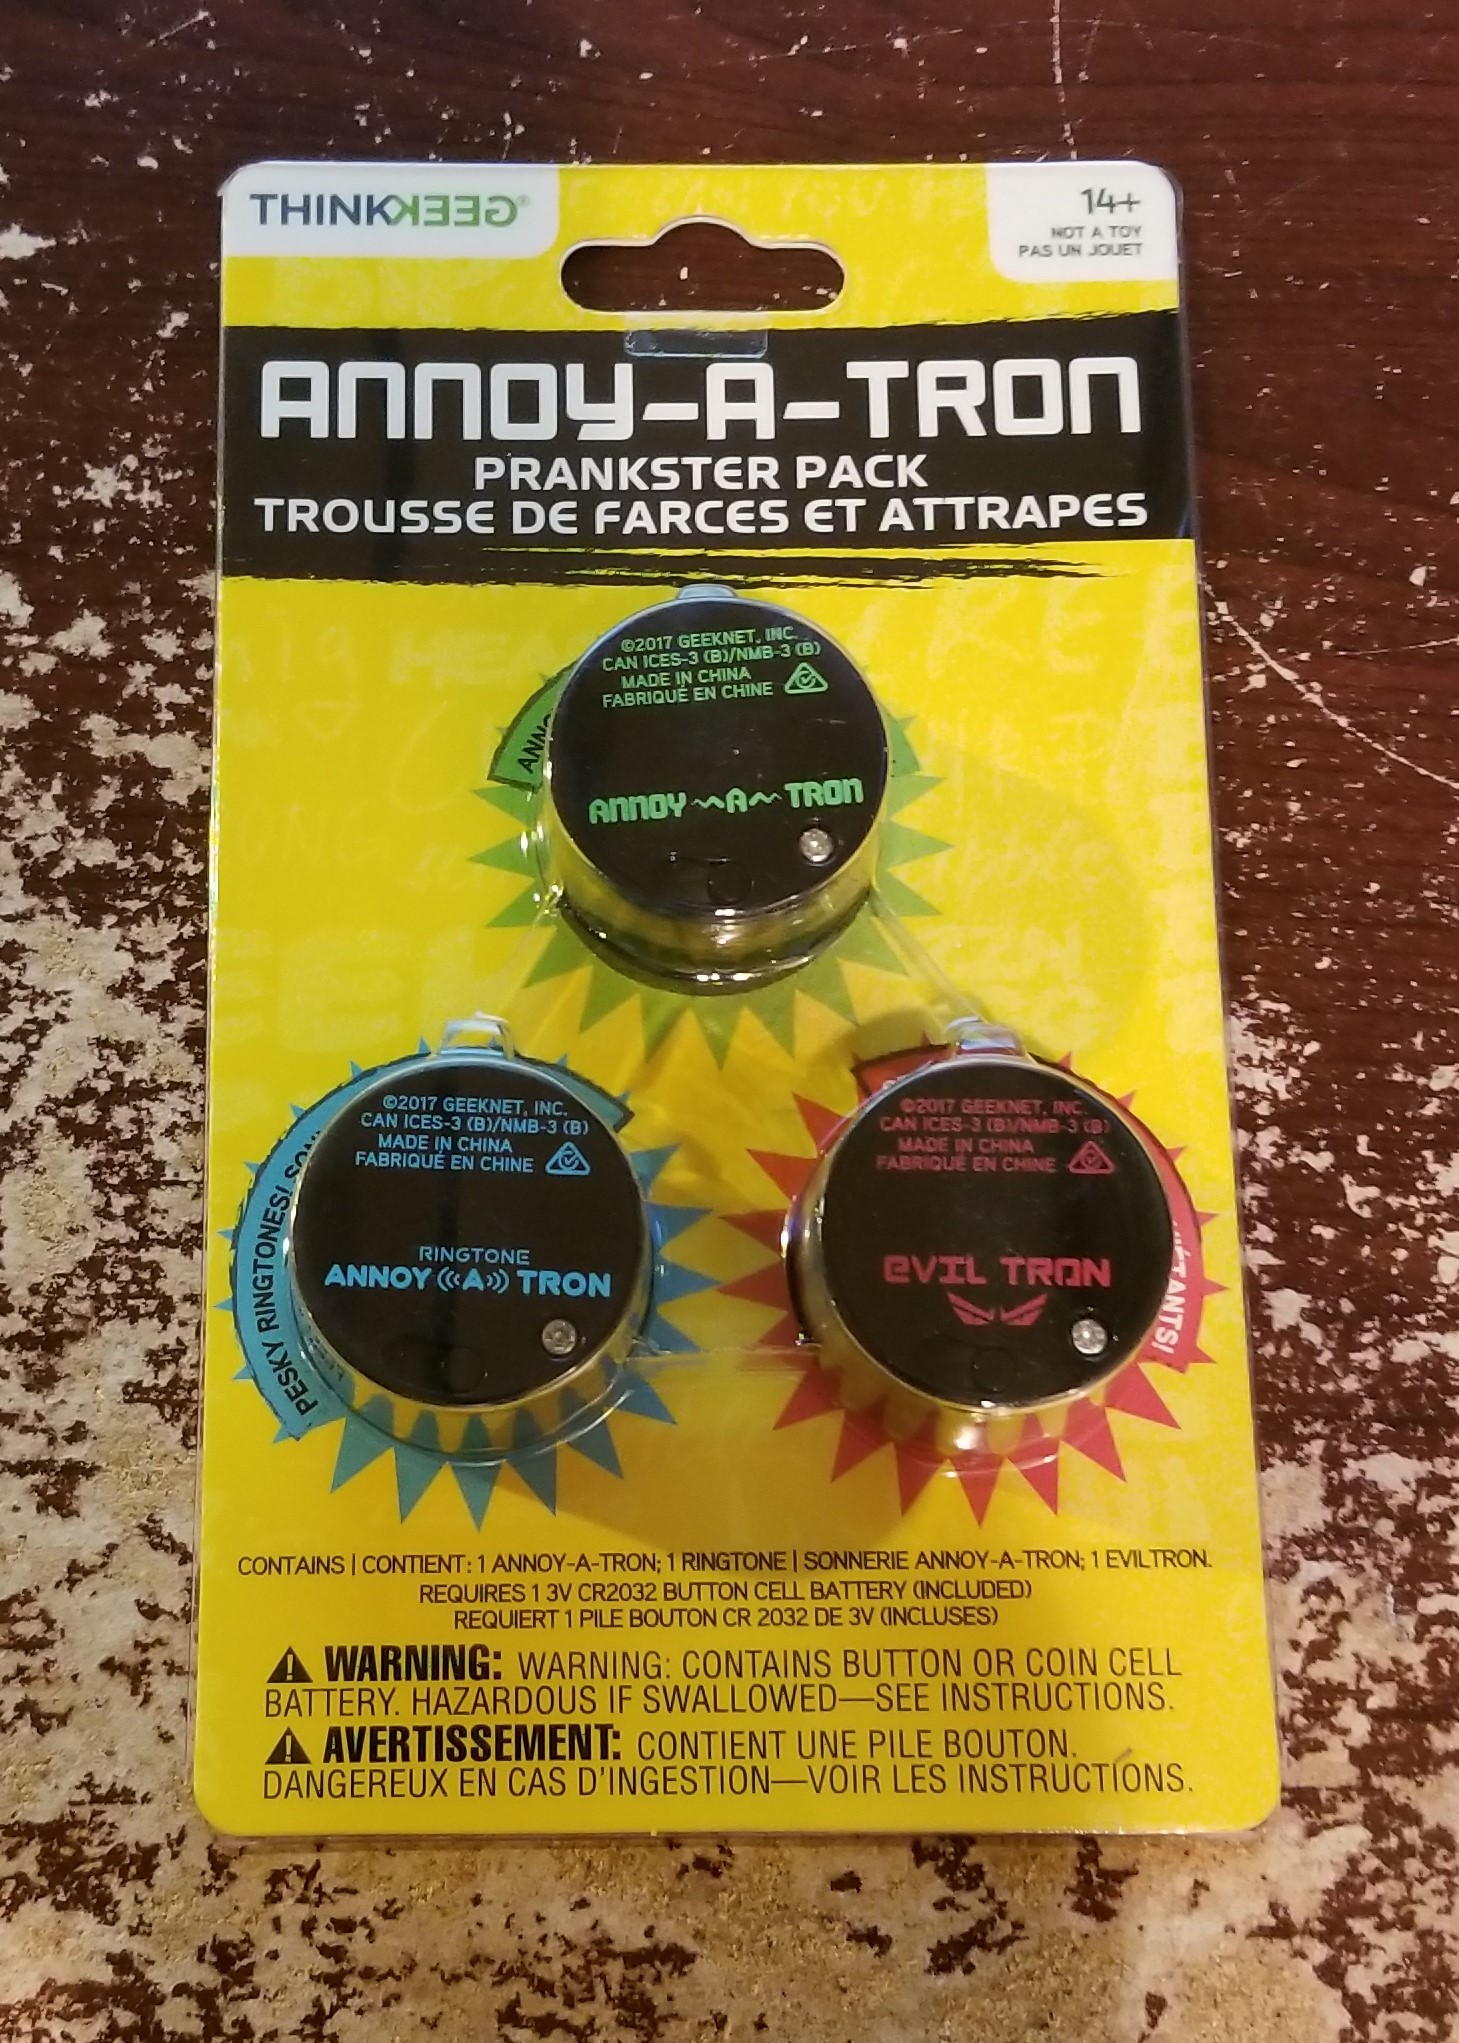 Annoy-a-tron Prankster Pack 3.0 - Includes 3 ThinkGeek Prank Products:  Annoy-a-tron, Ringtone Annoy-a-tron, and Eviltron : : Toys